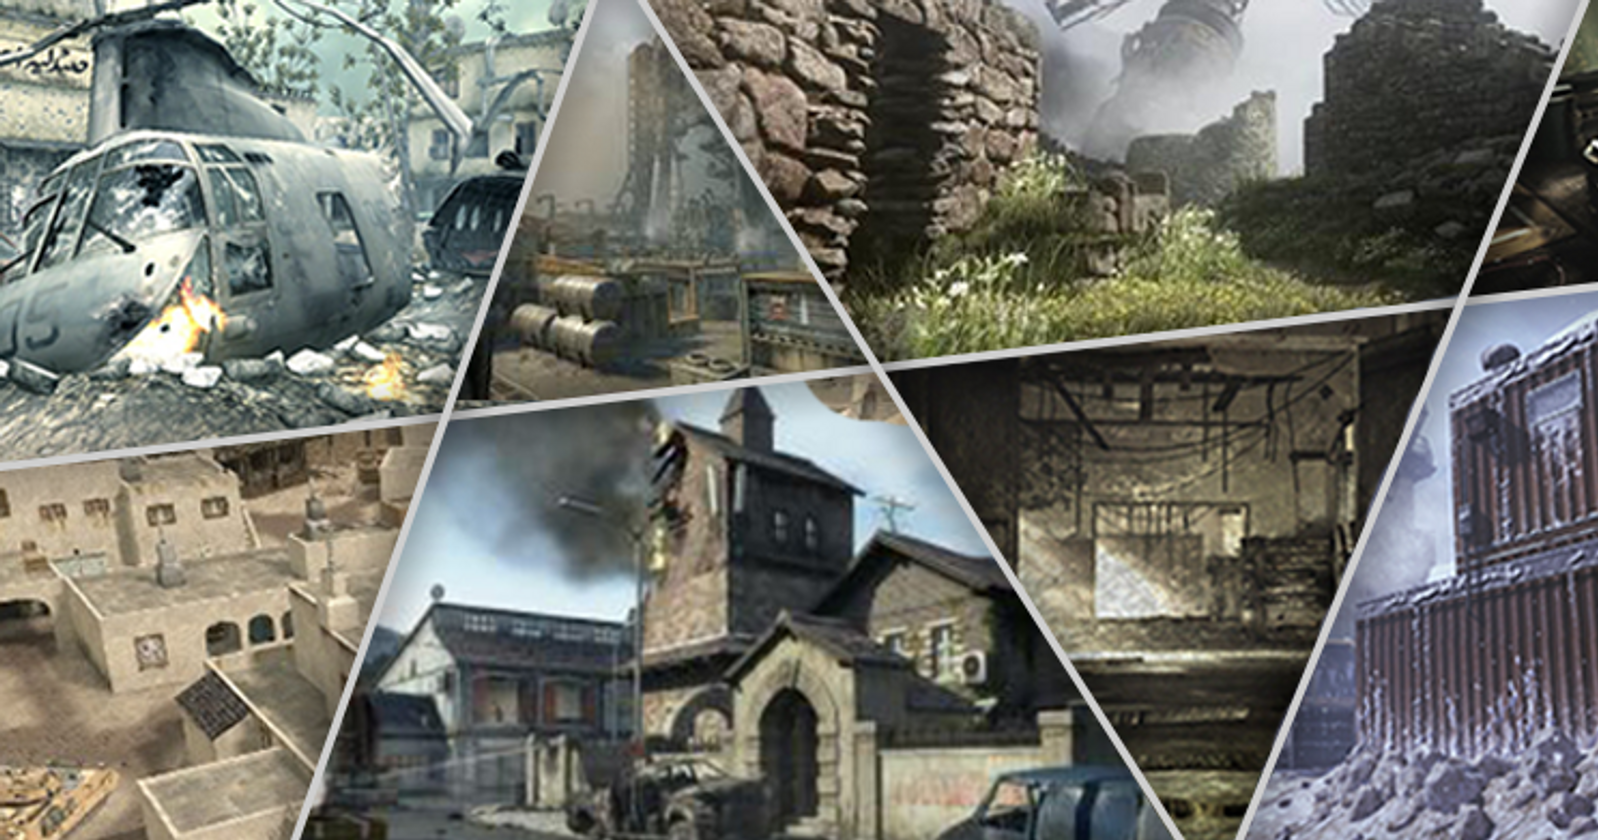 The worst multiplayer maps in CoD history, ranked - Dot Esports